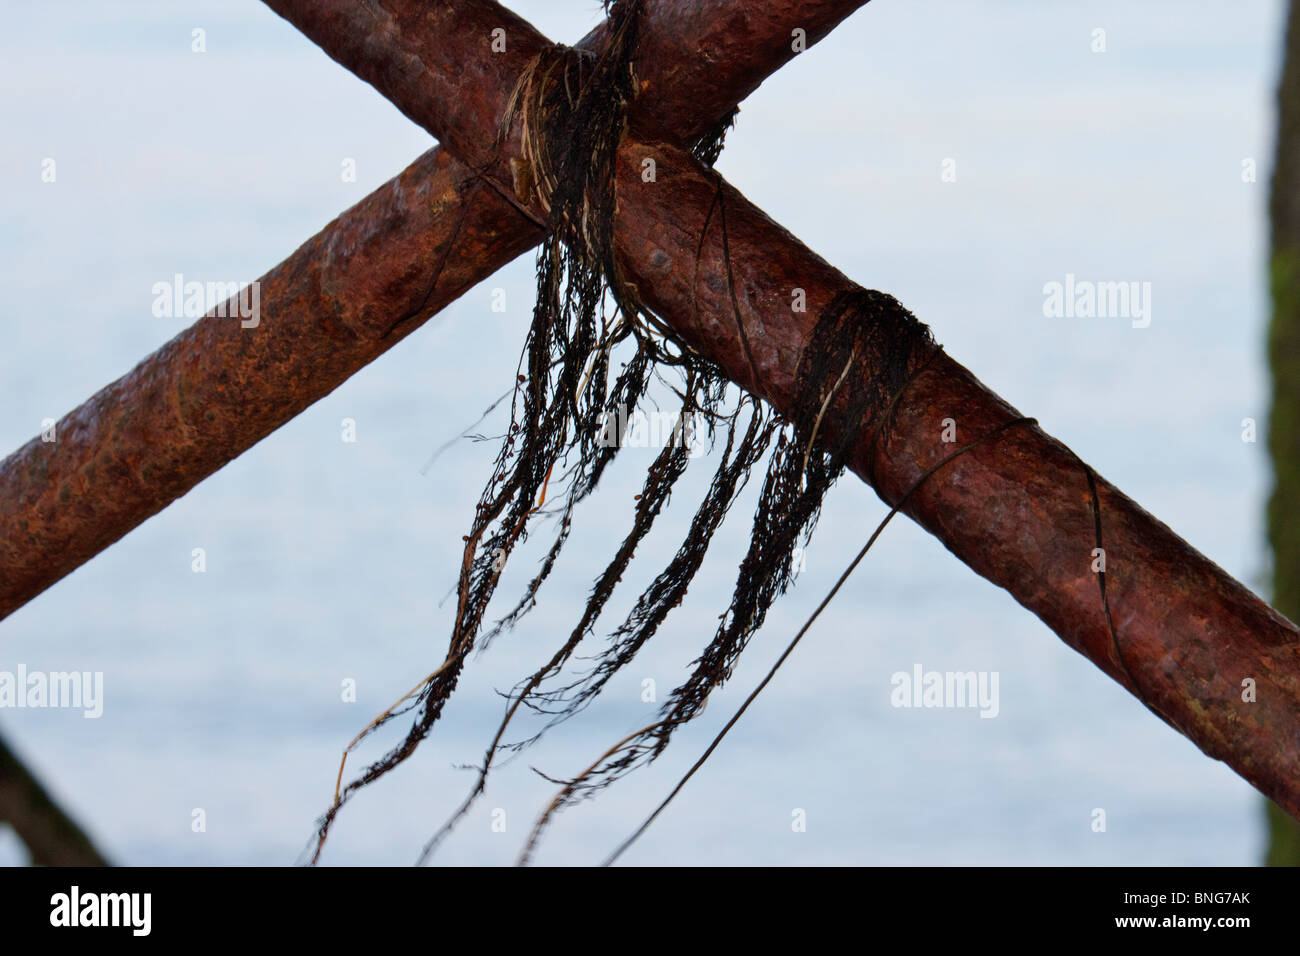 Strands of seaweed and netting hanging from support crossbars below Southsea Pier Stock Photo